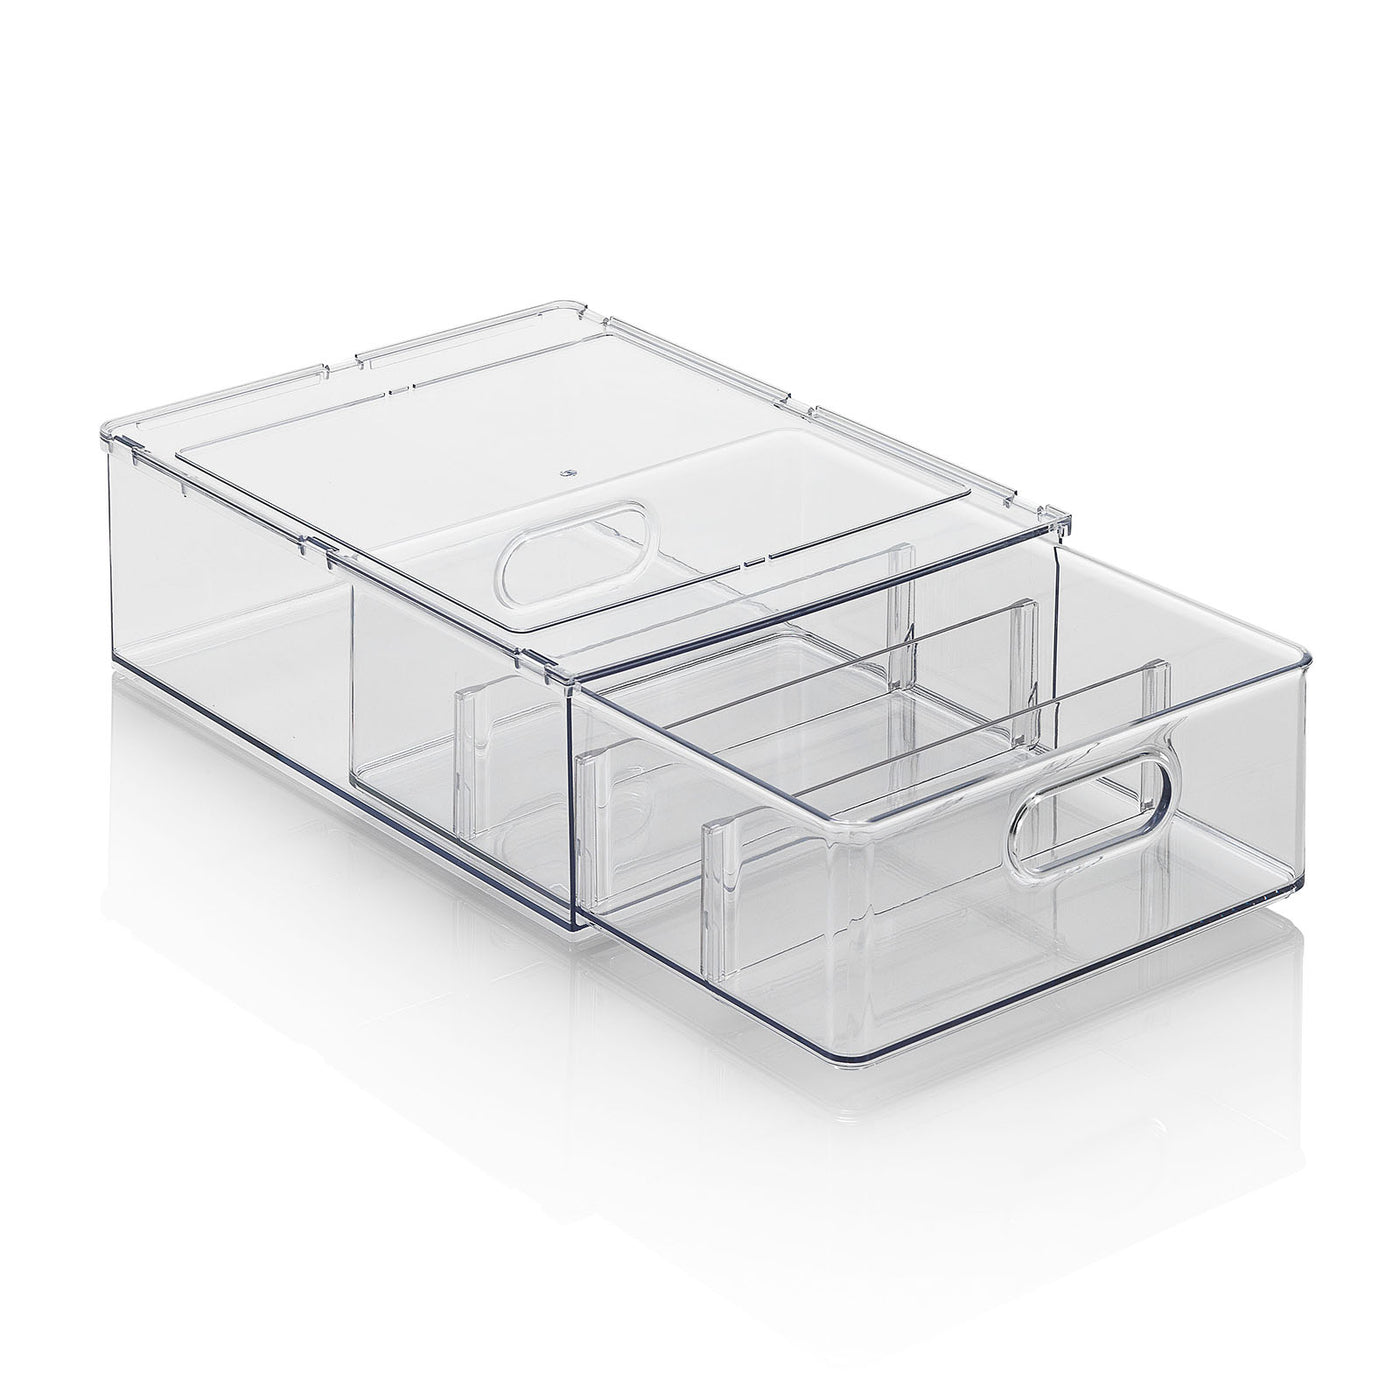 KRAU drawer/container with extractable dividers